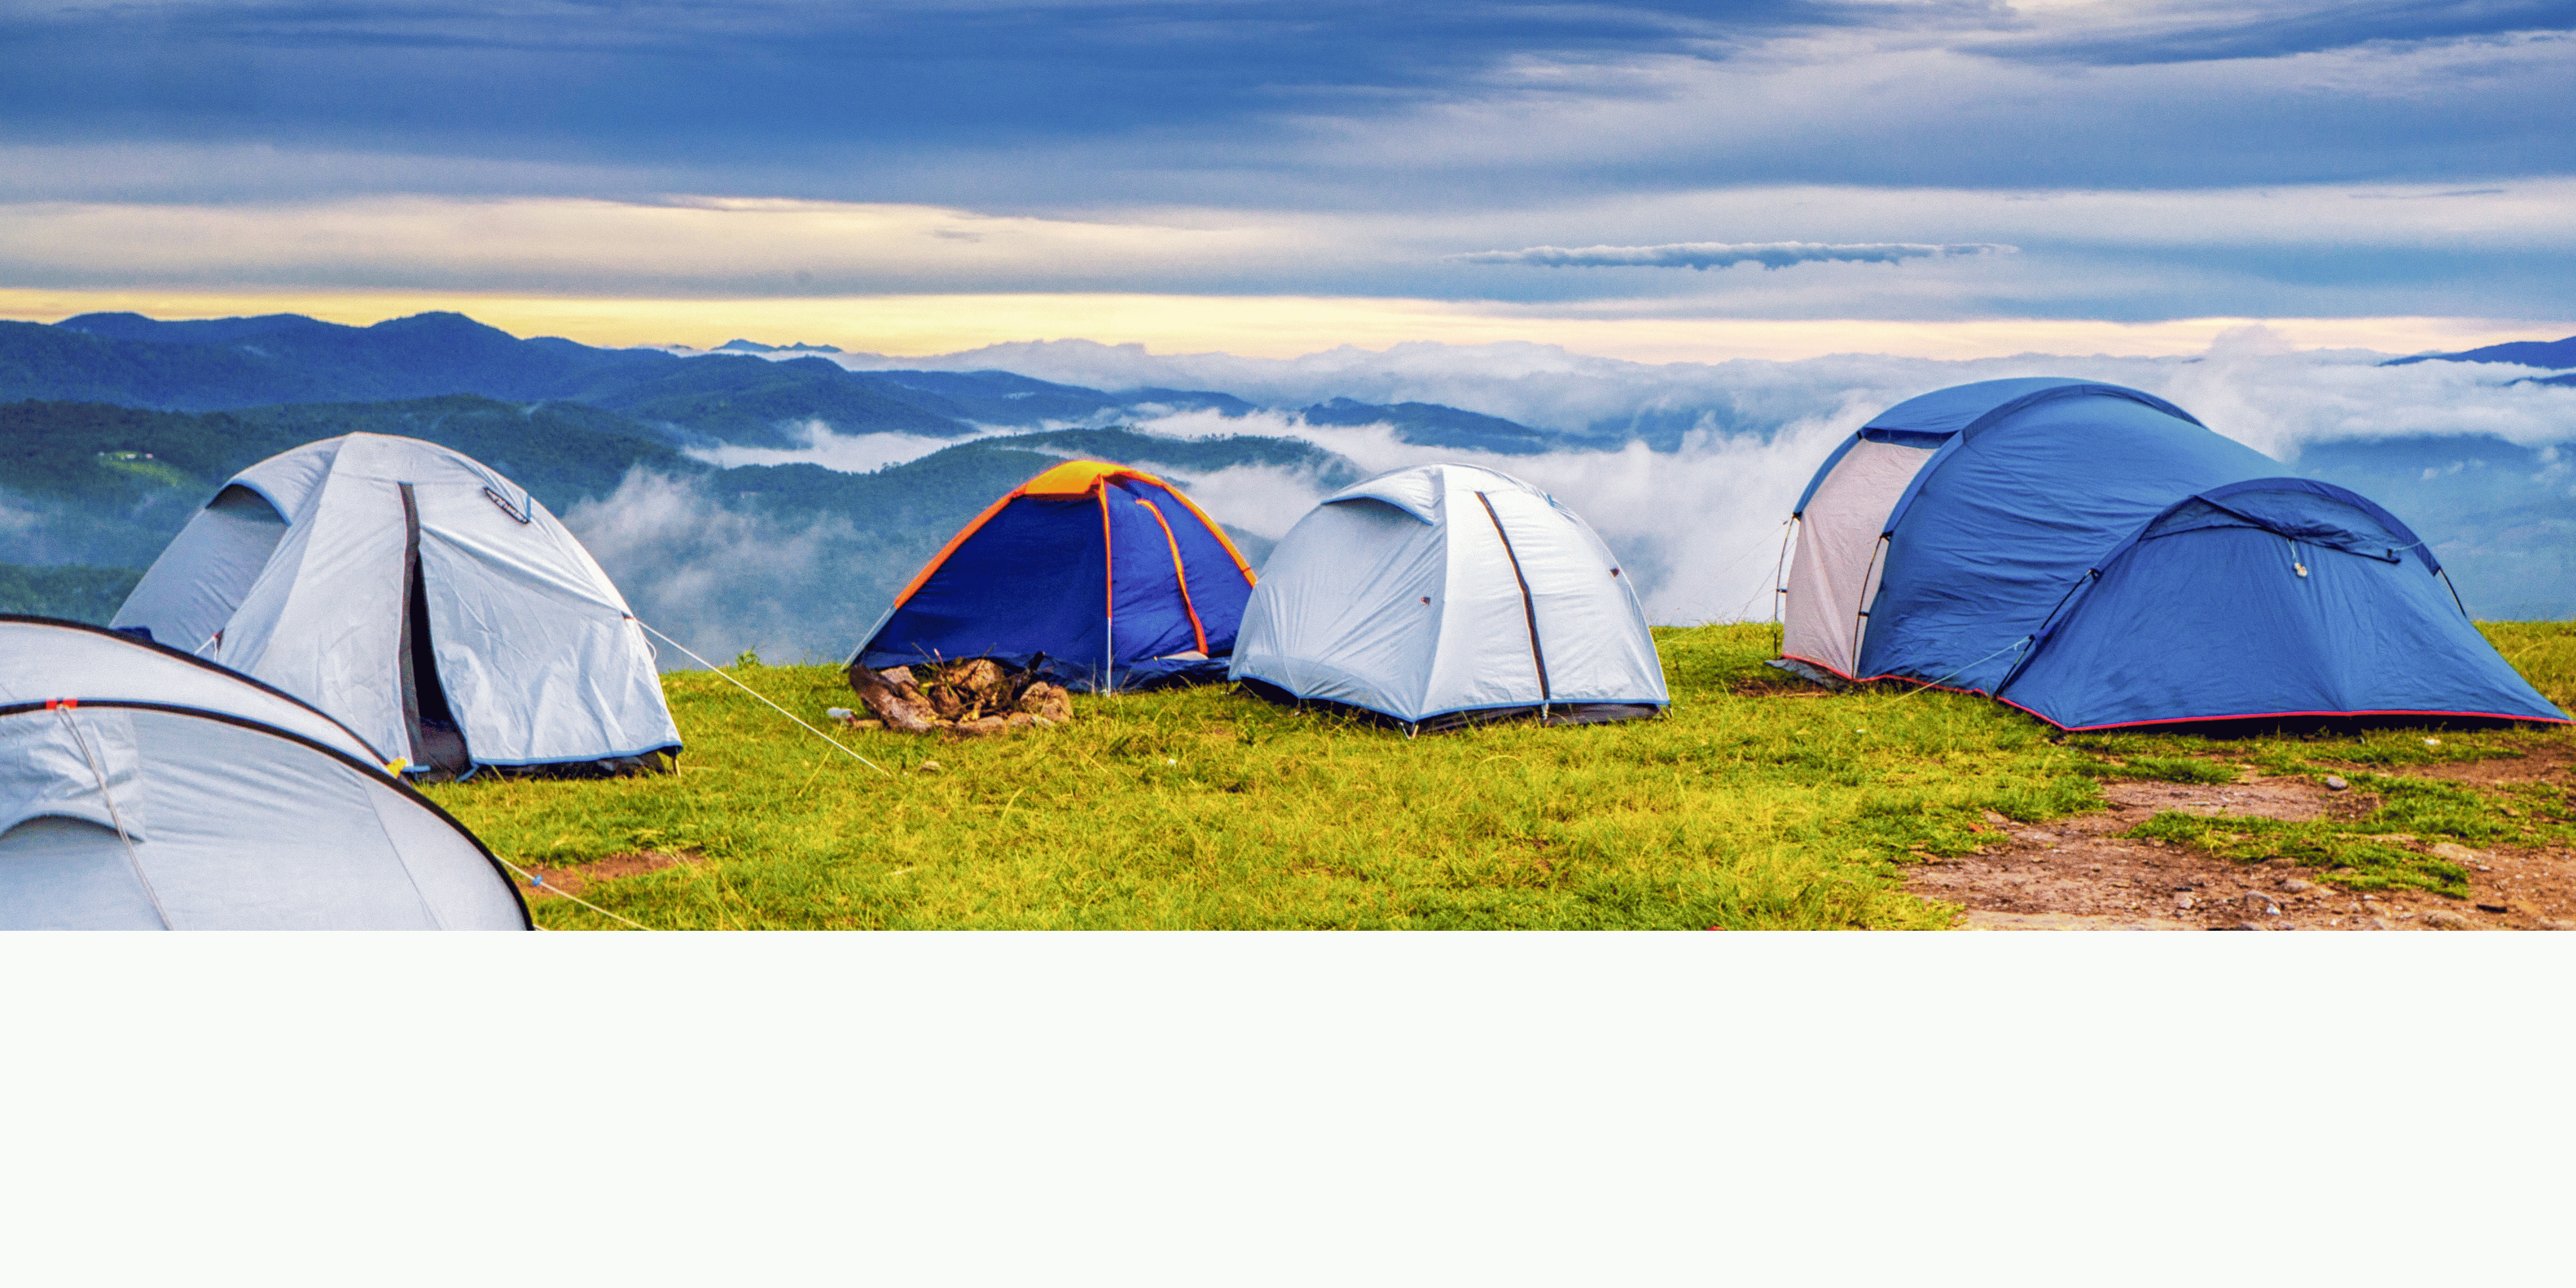 Camping tents for two or family, camping accessories and sleeping bags 